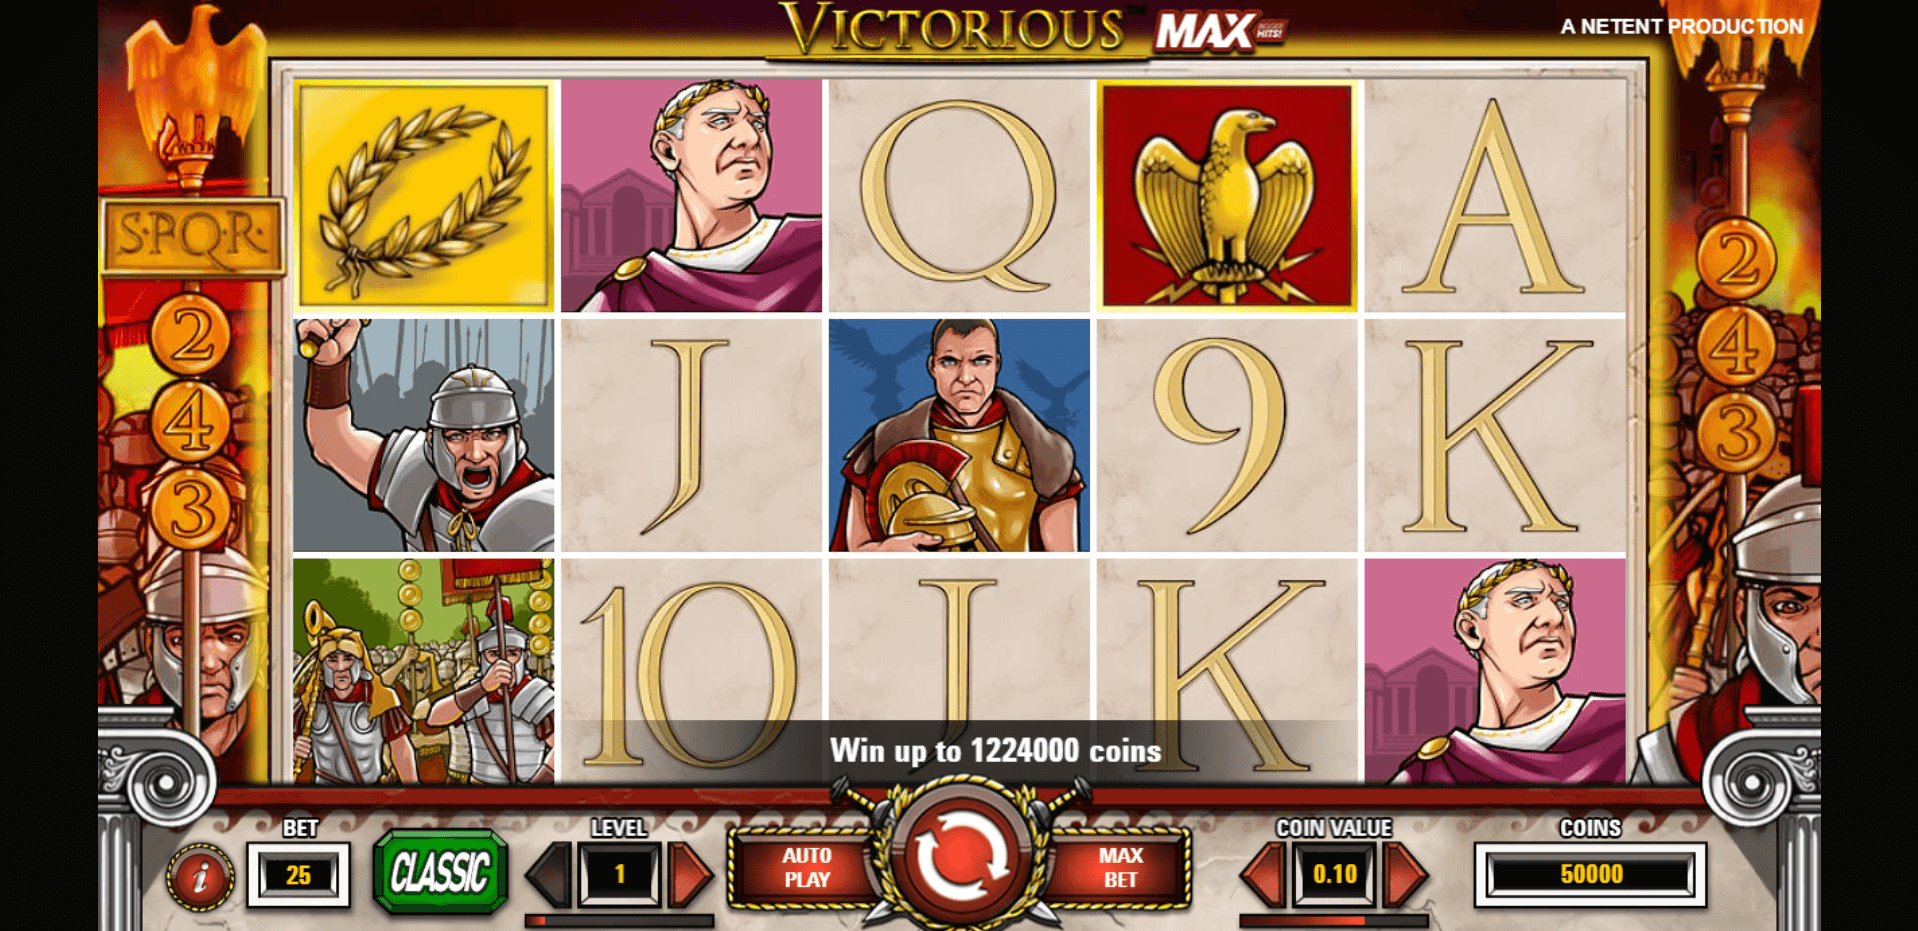 Victorious MAX slot play free